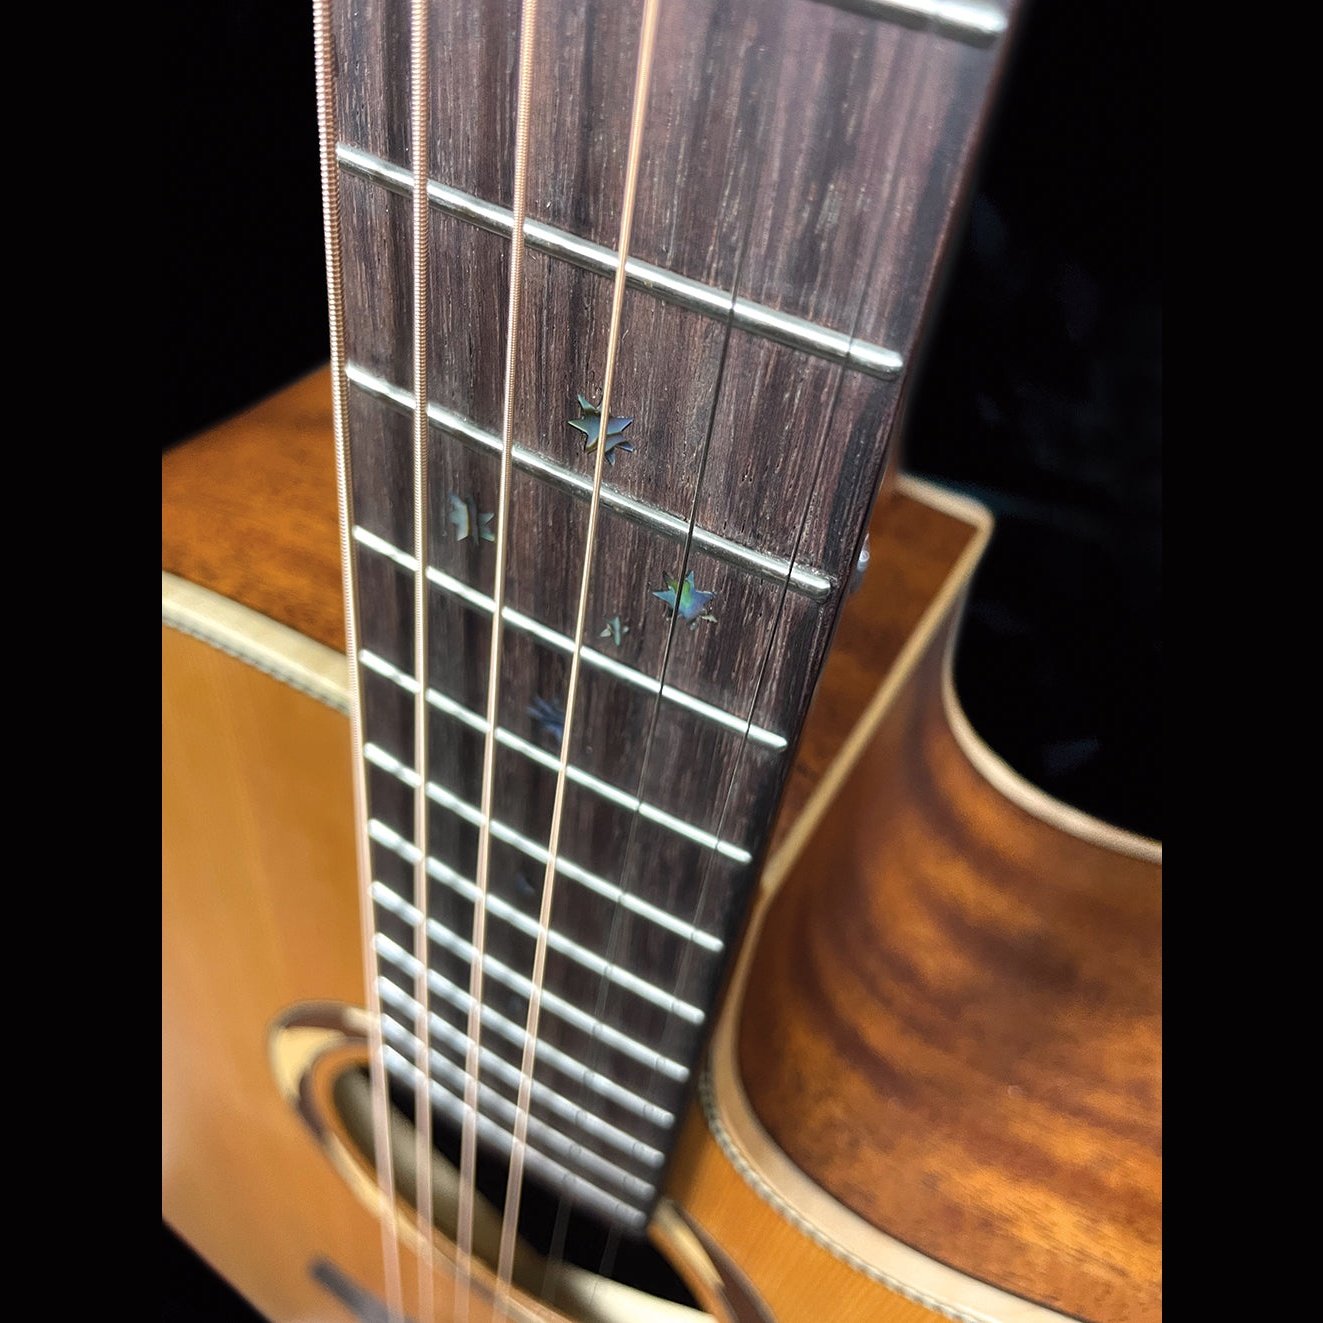 Tanglewood 20th Anniversary Limited Edition Dreadnought C/E